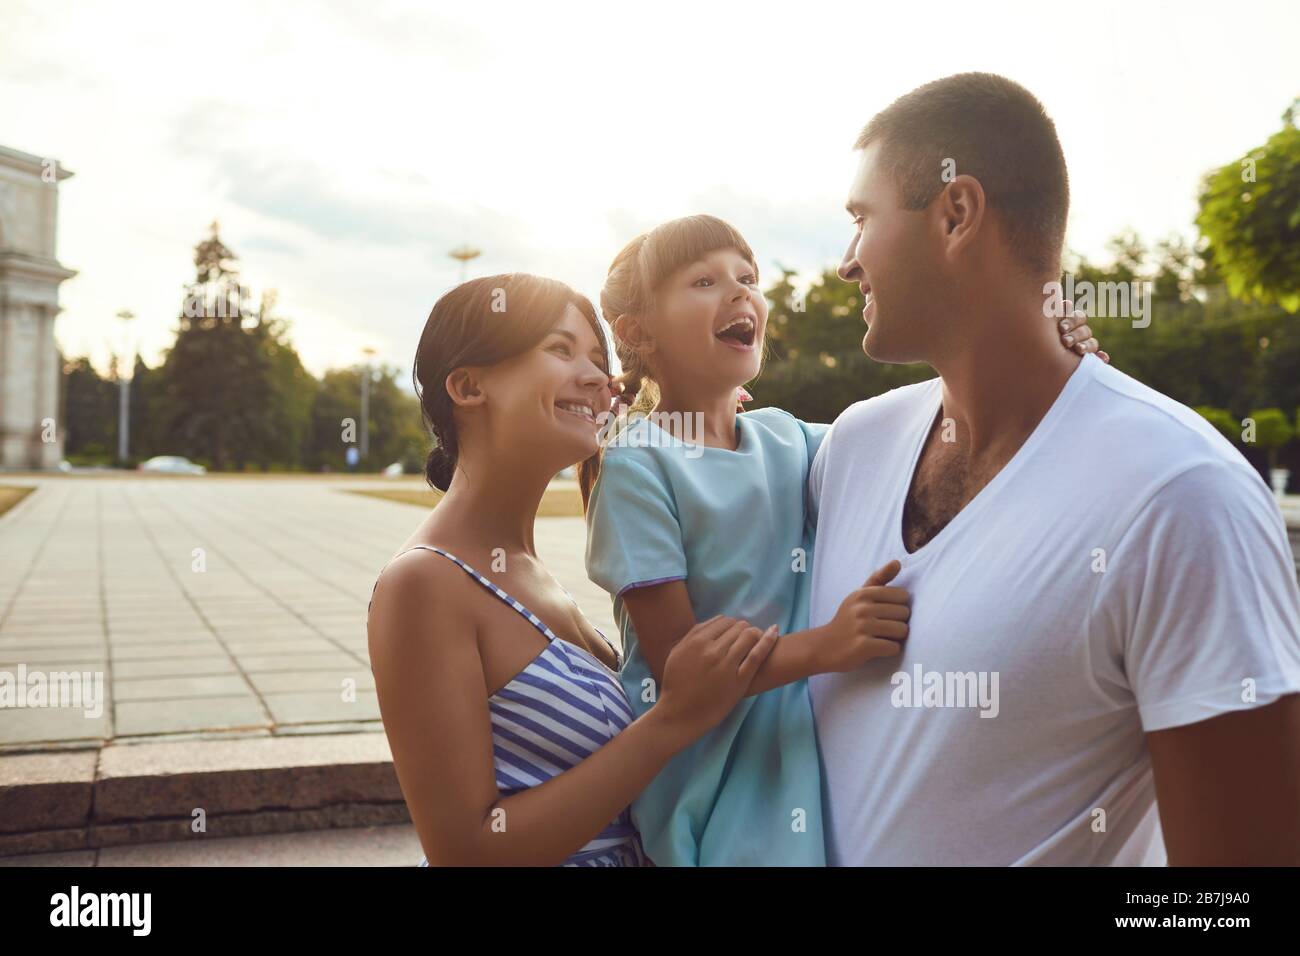 Happy smiling family walking on the street. Stock Photo